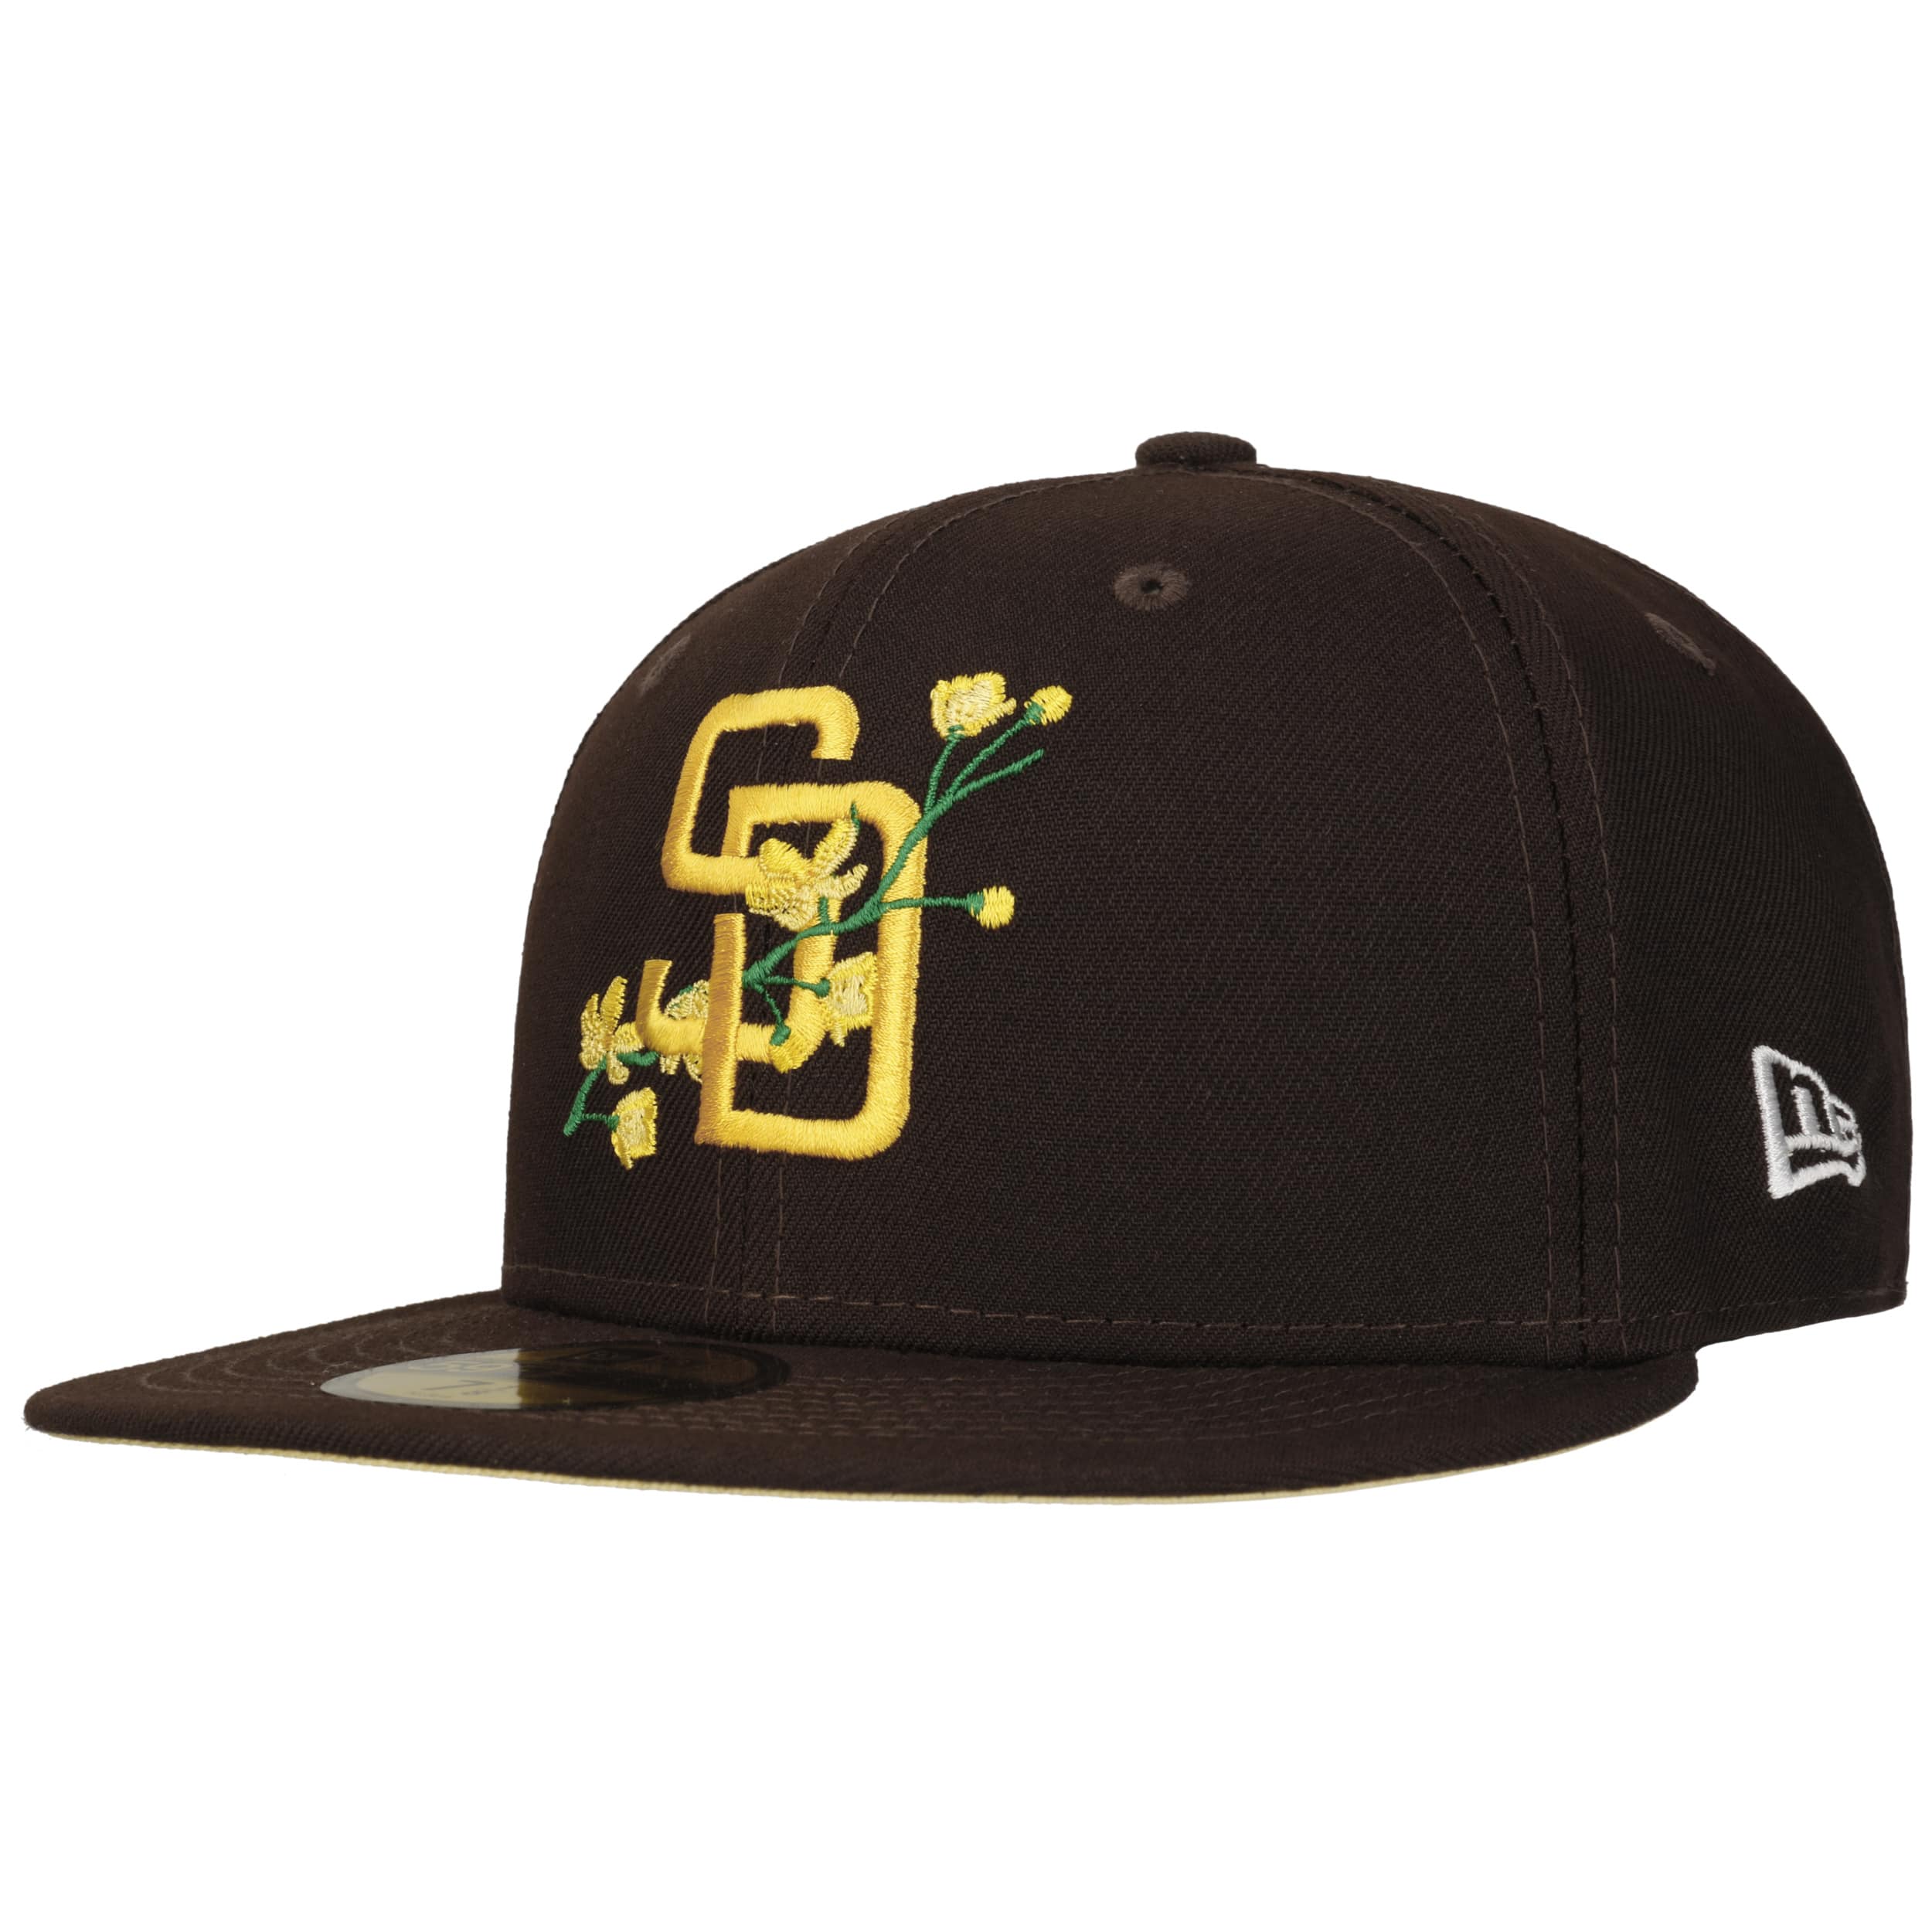 59Fifty MLB San Diego Padres Cap by New Era - 48,95 €